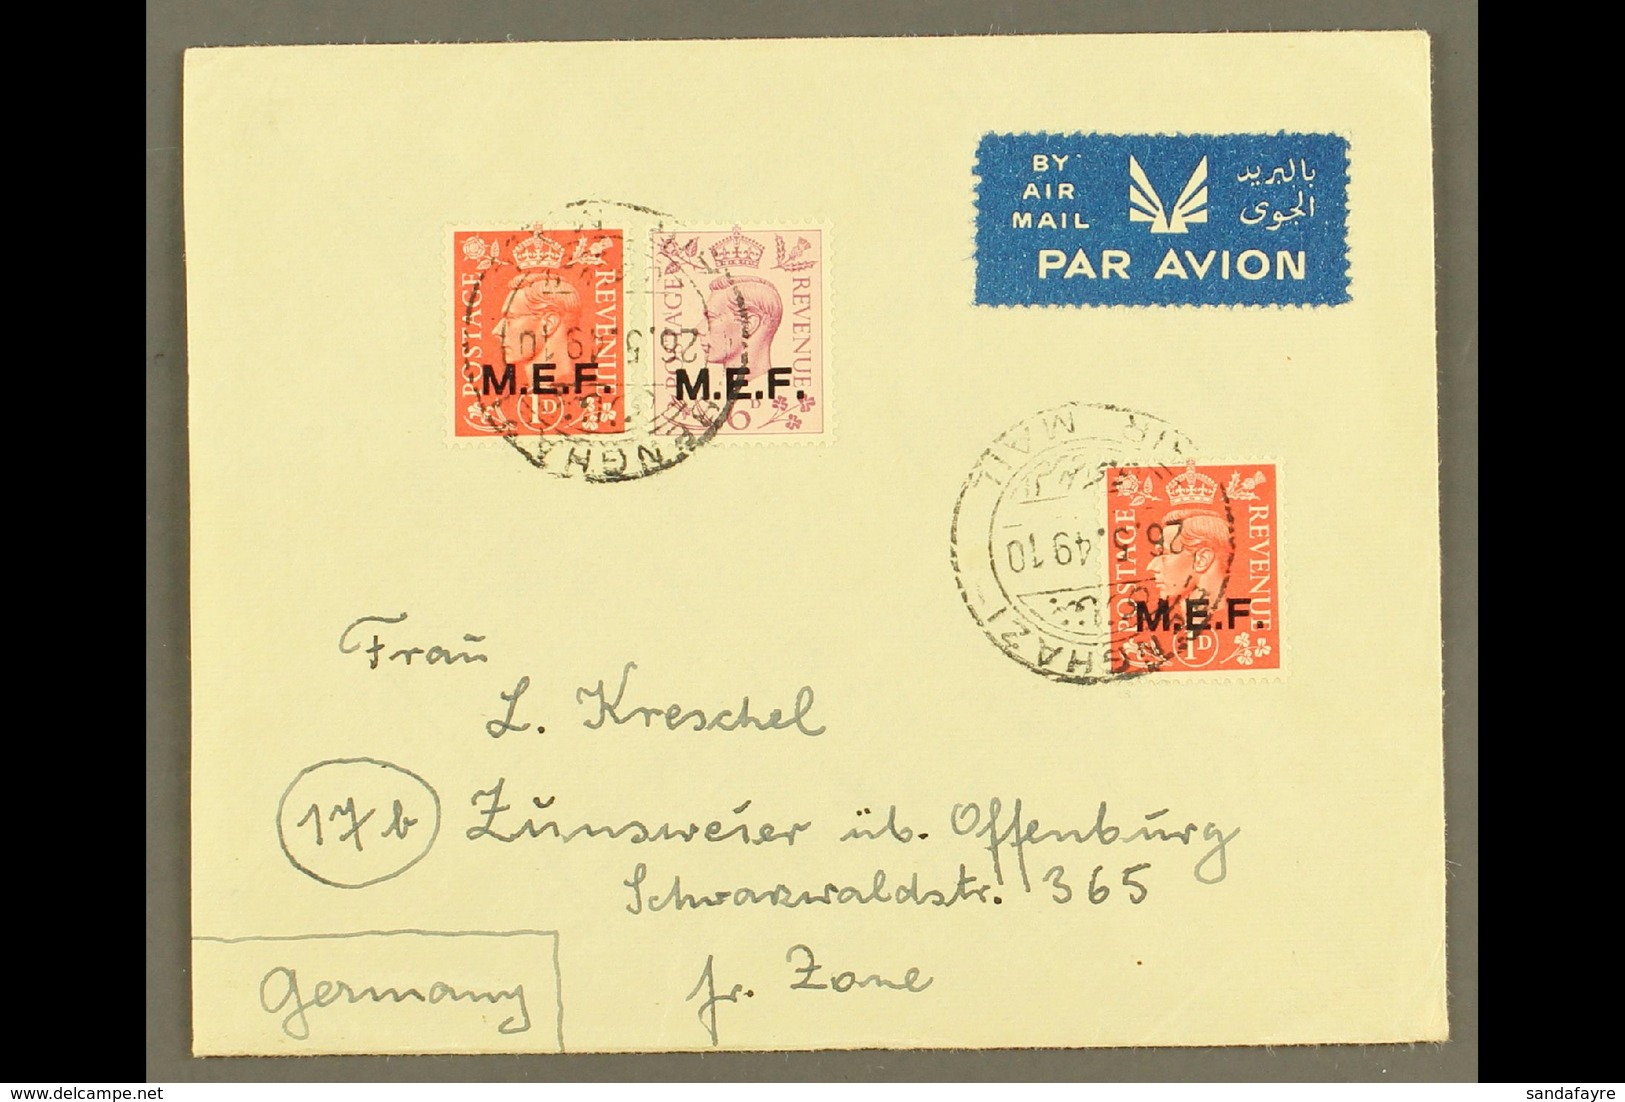 CYRENAICA  1949 Airmailed Cover To French Zone, Germany, Franked KGVI 1d X2 & 6d "M.E.F." Ovpts, SG M11, M16, Benghazi 2 - Italienisch Ost-Afrika